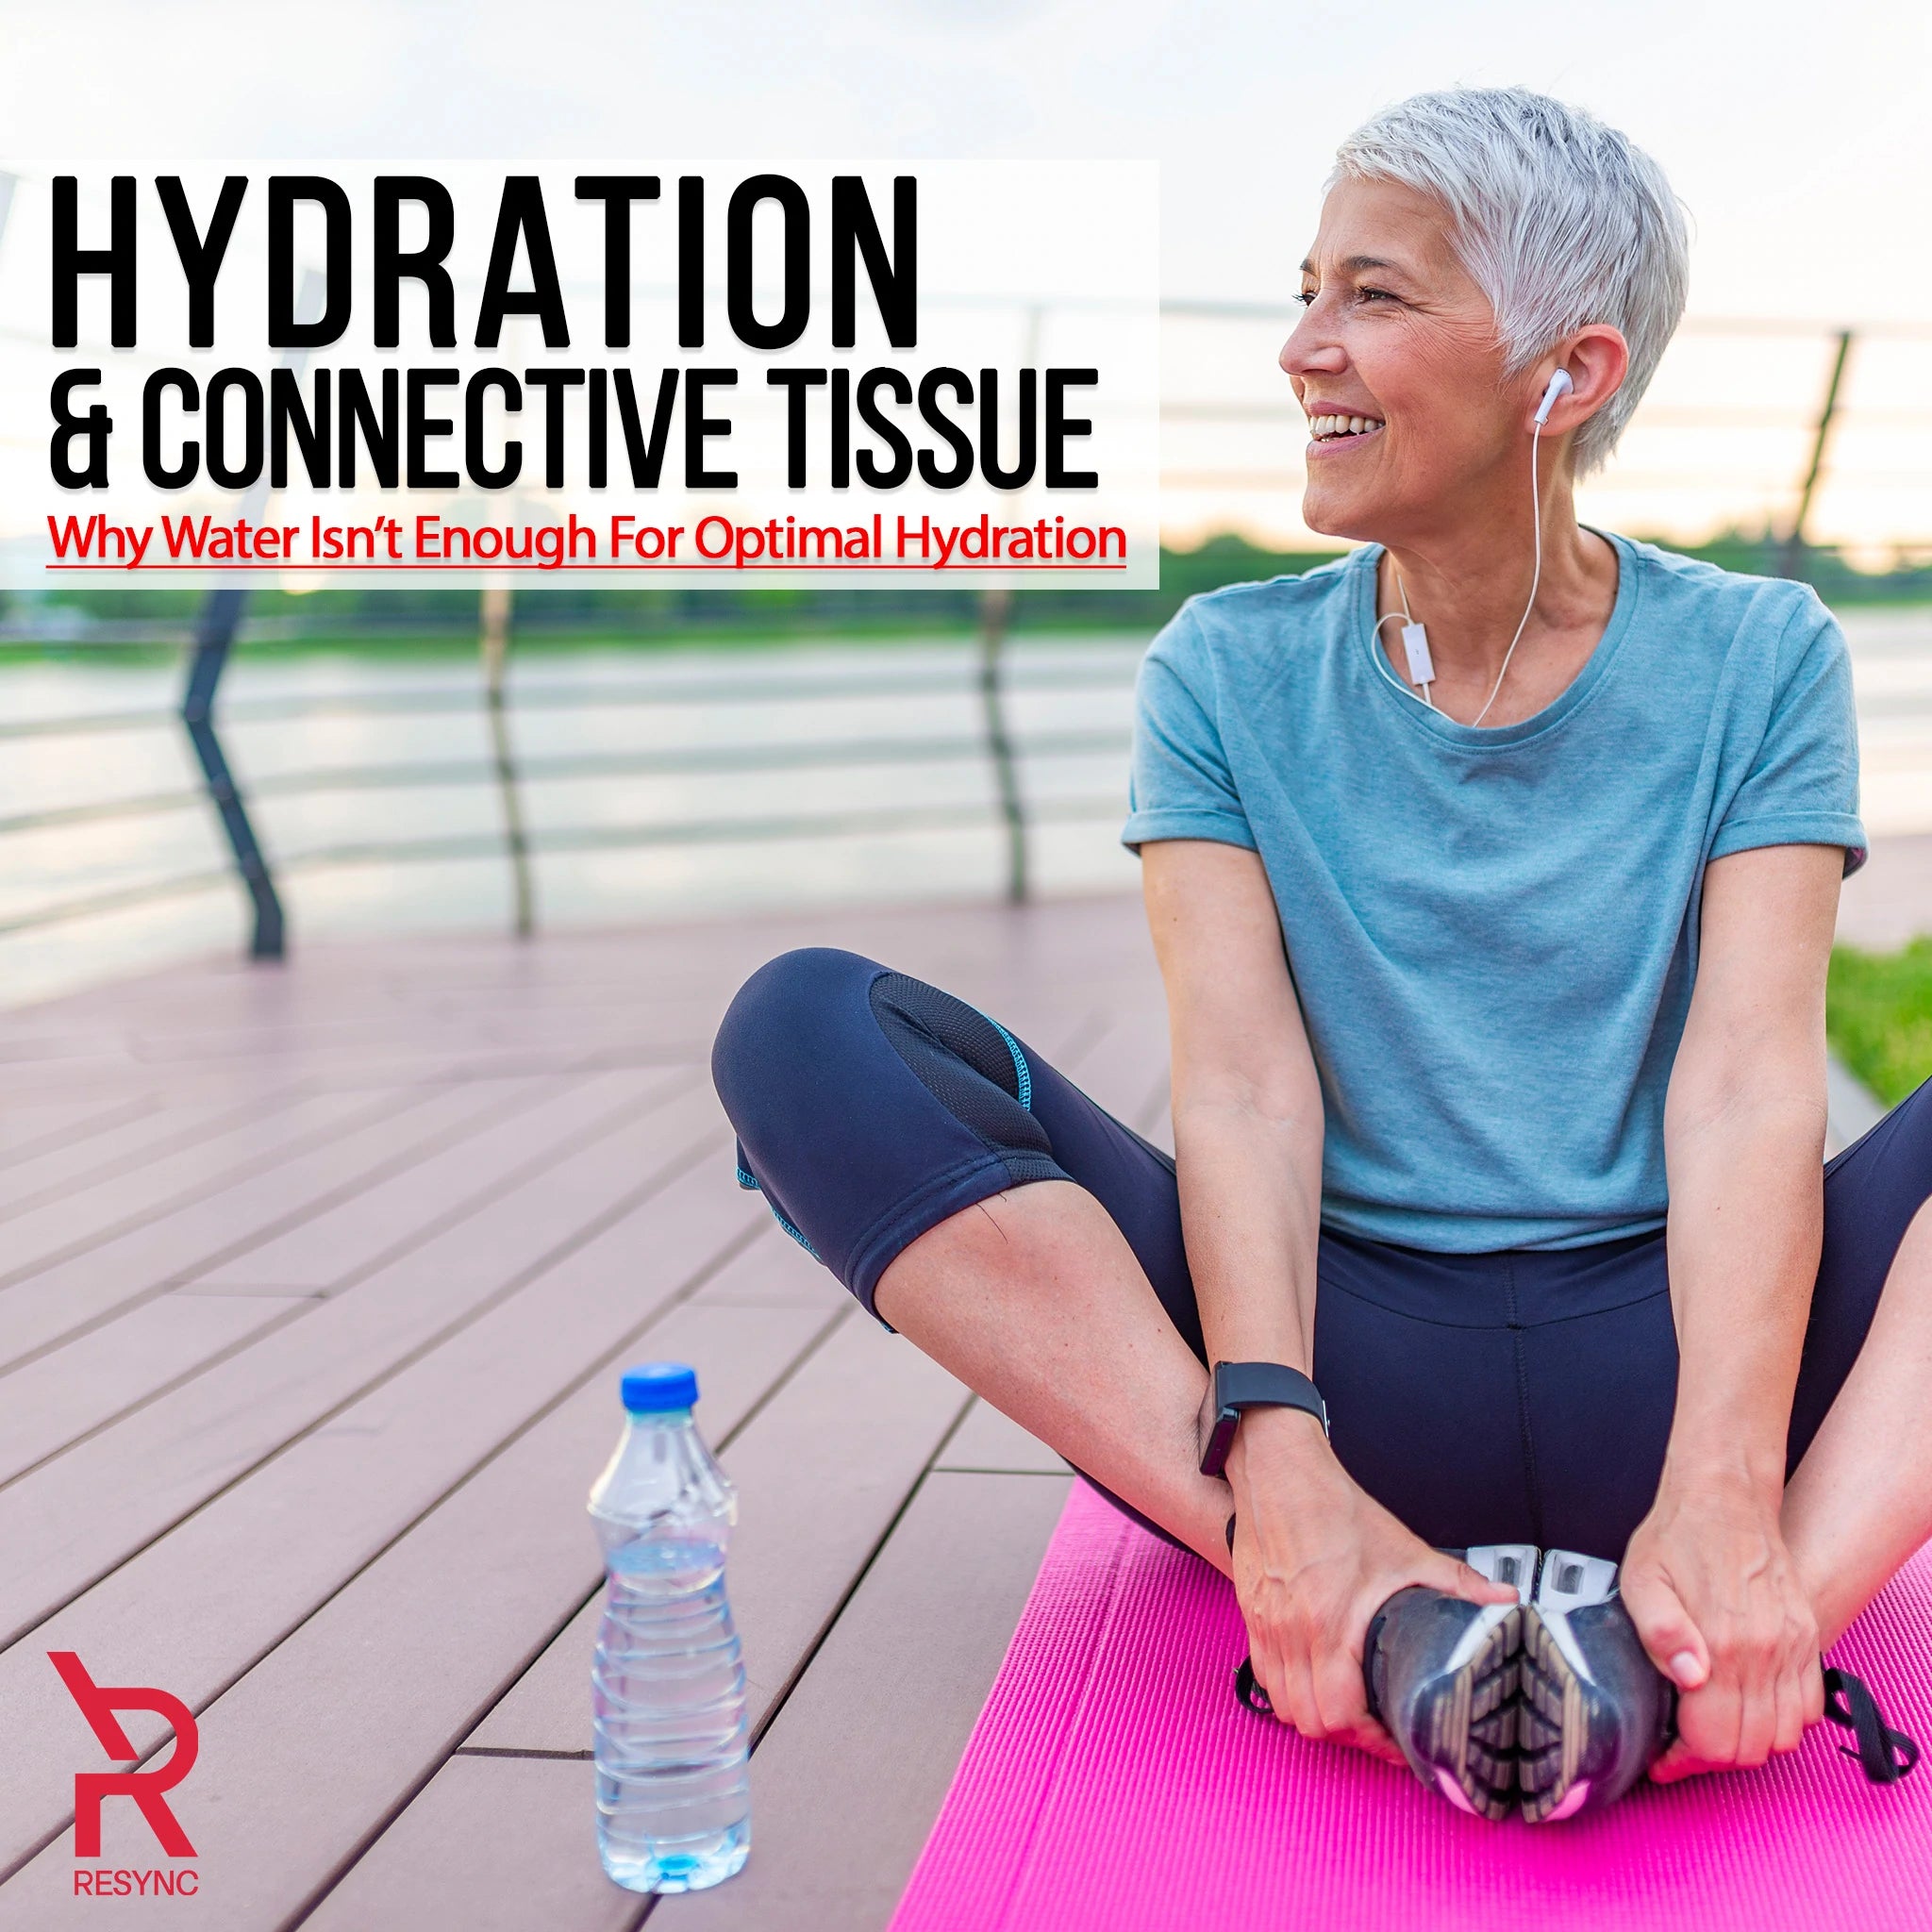 Hydration & connective tissue 